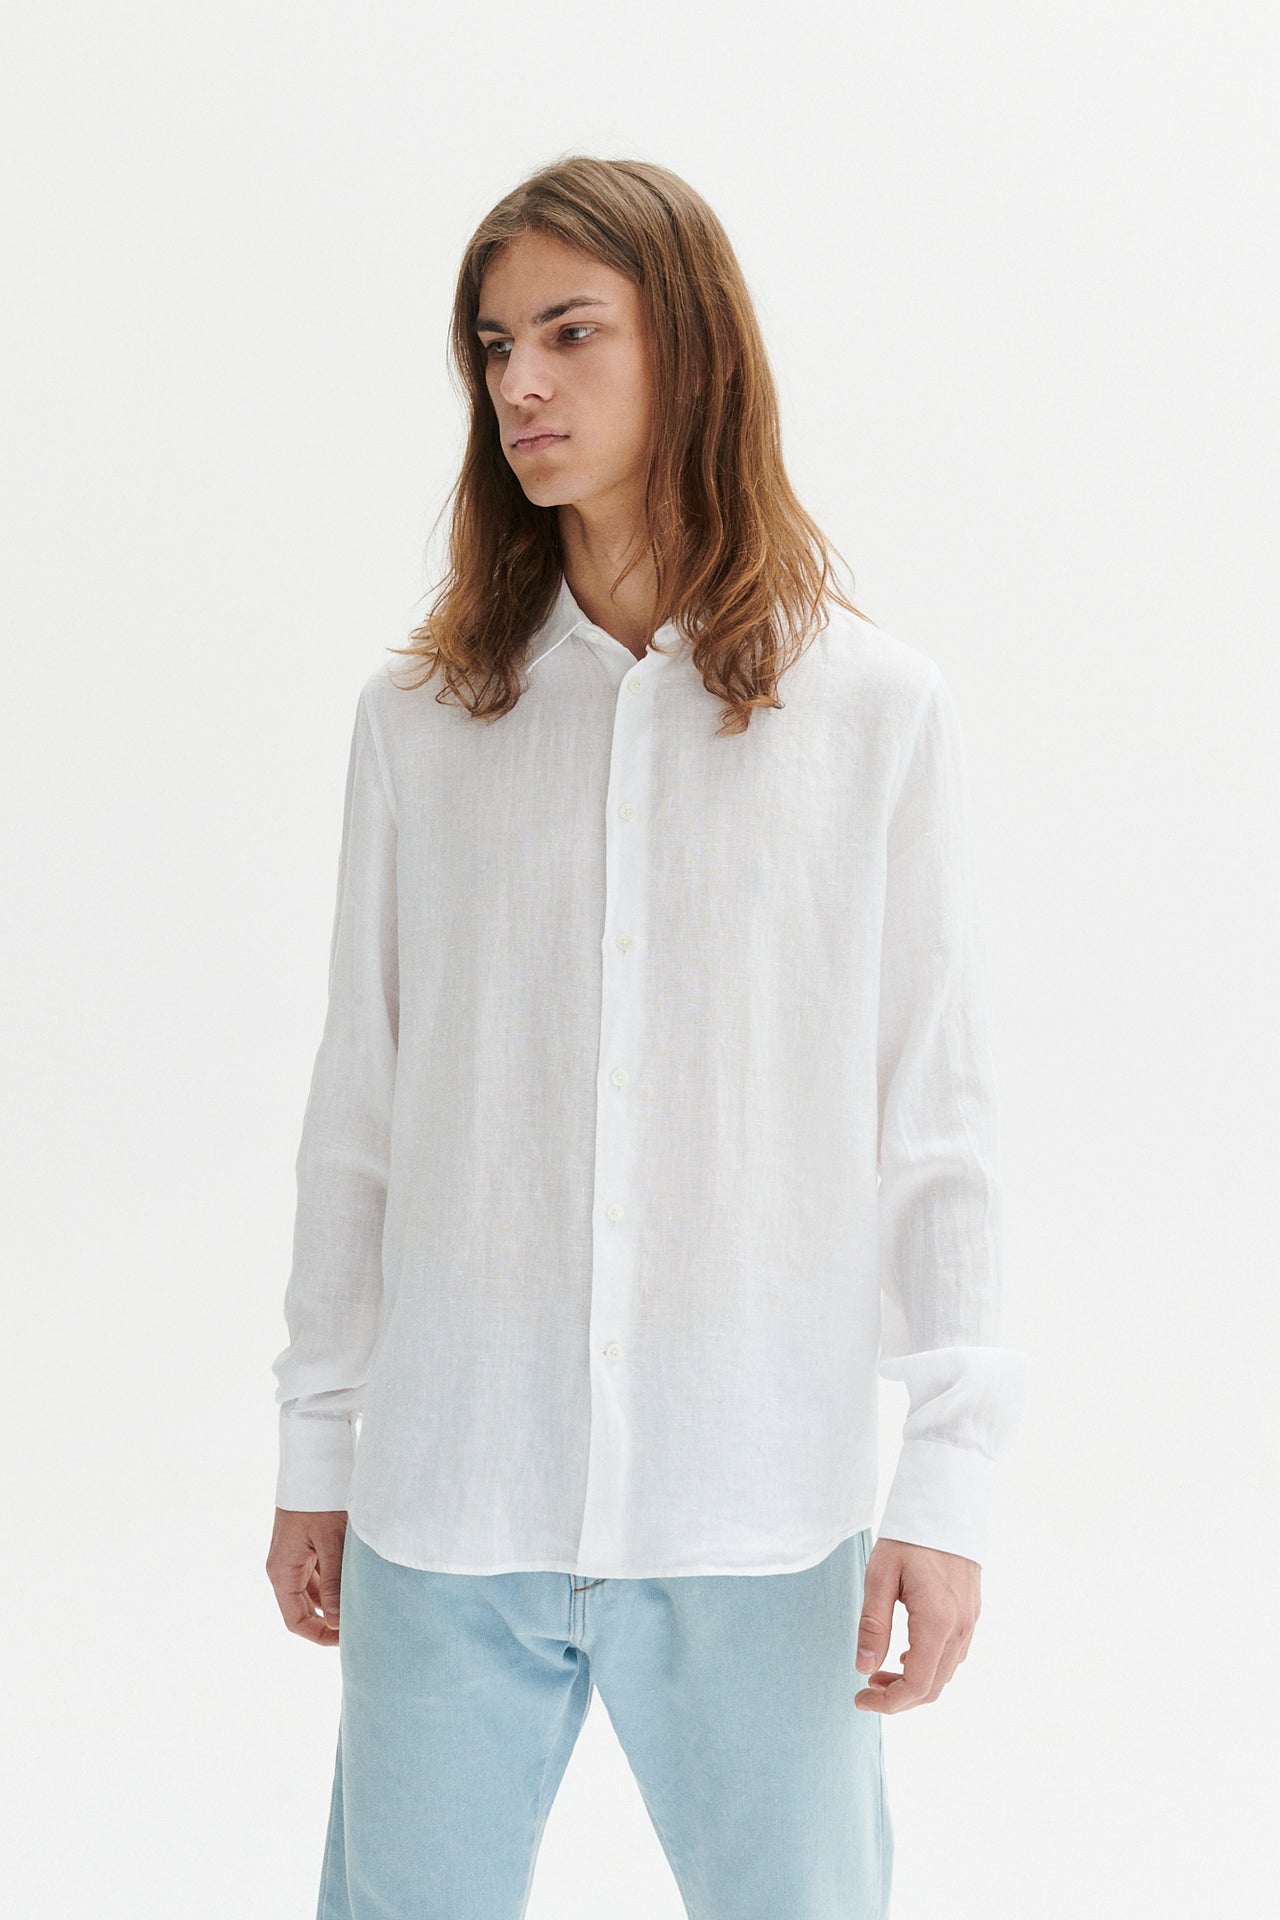 Feel Good Shirt in a Soft Pure White Airy Bohemian Linen